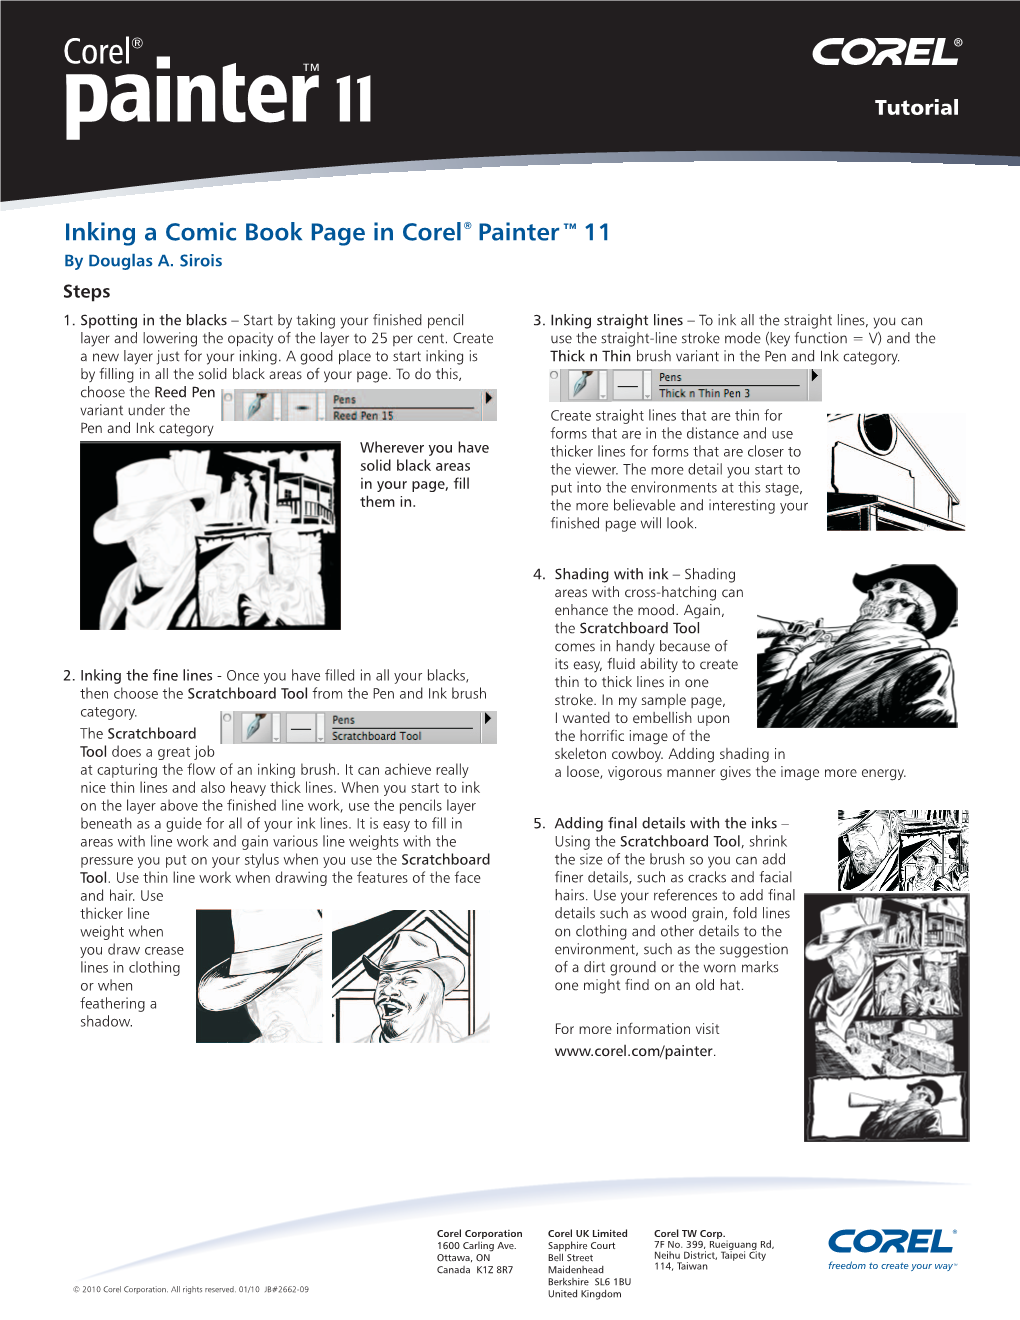 Inking a Comic Book Page in Corel® Painter™ 11 by Douglas A